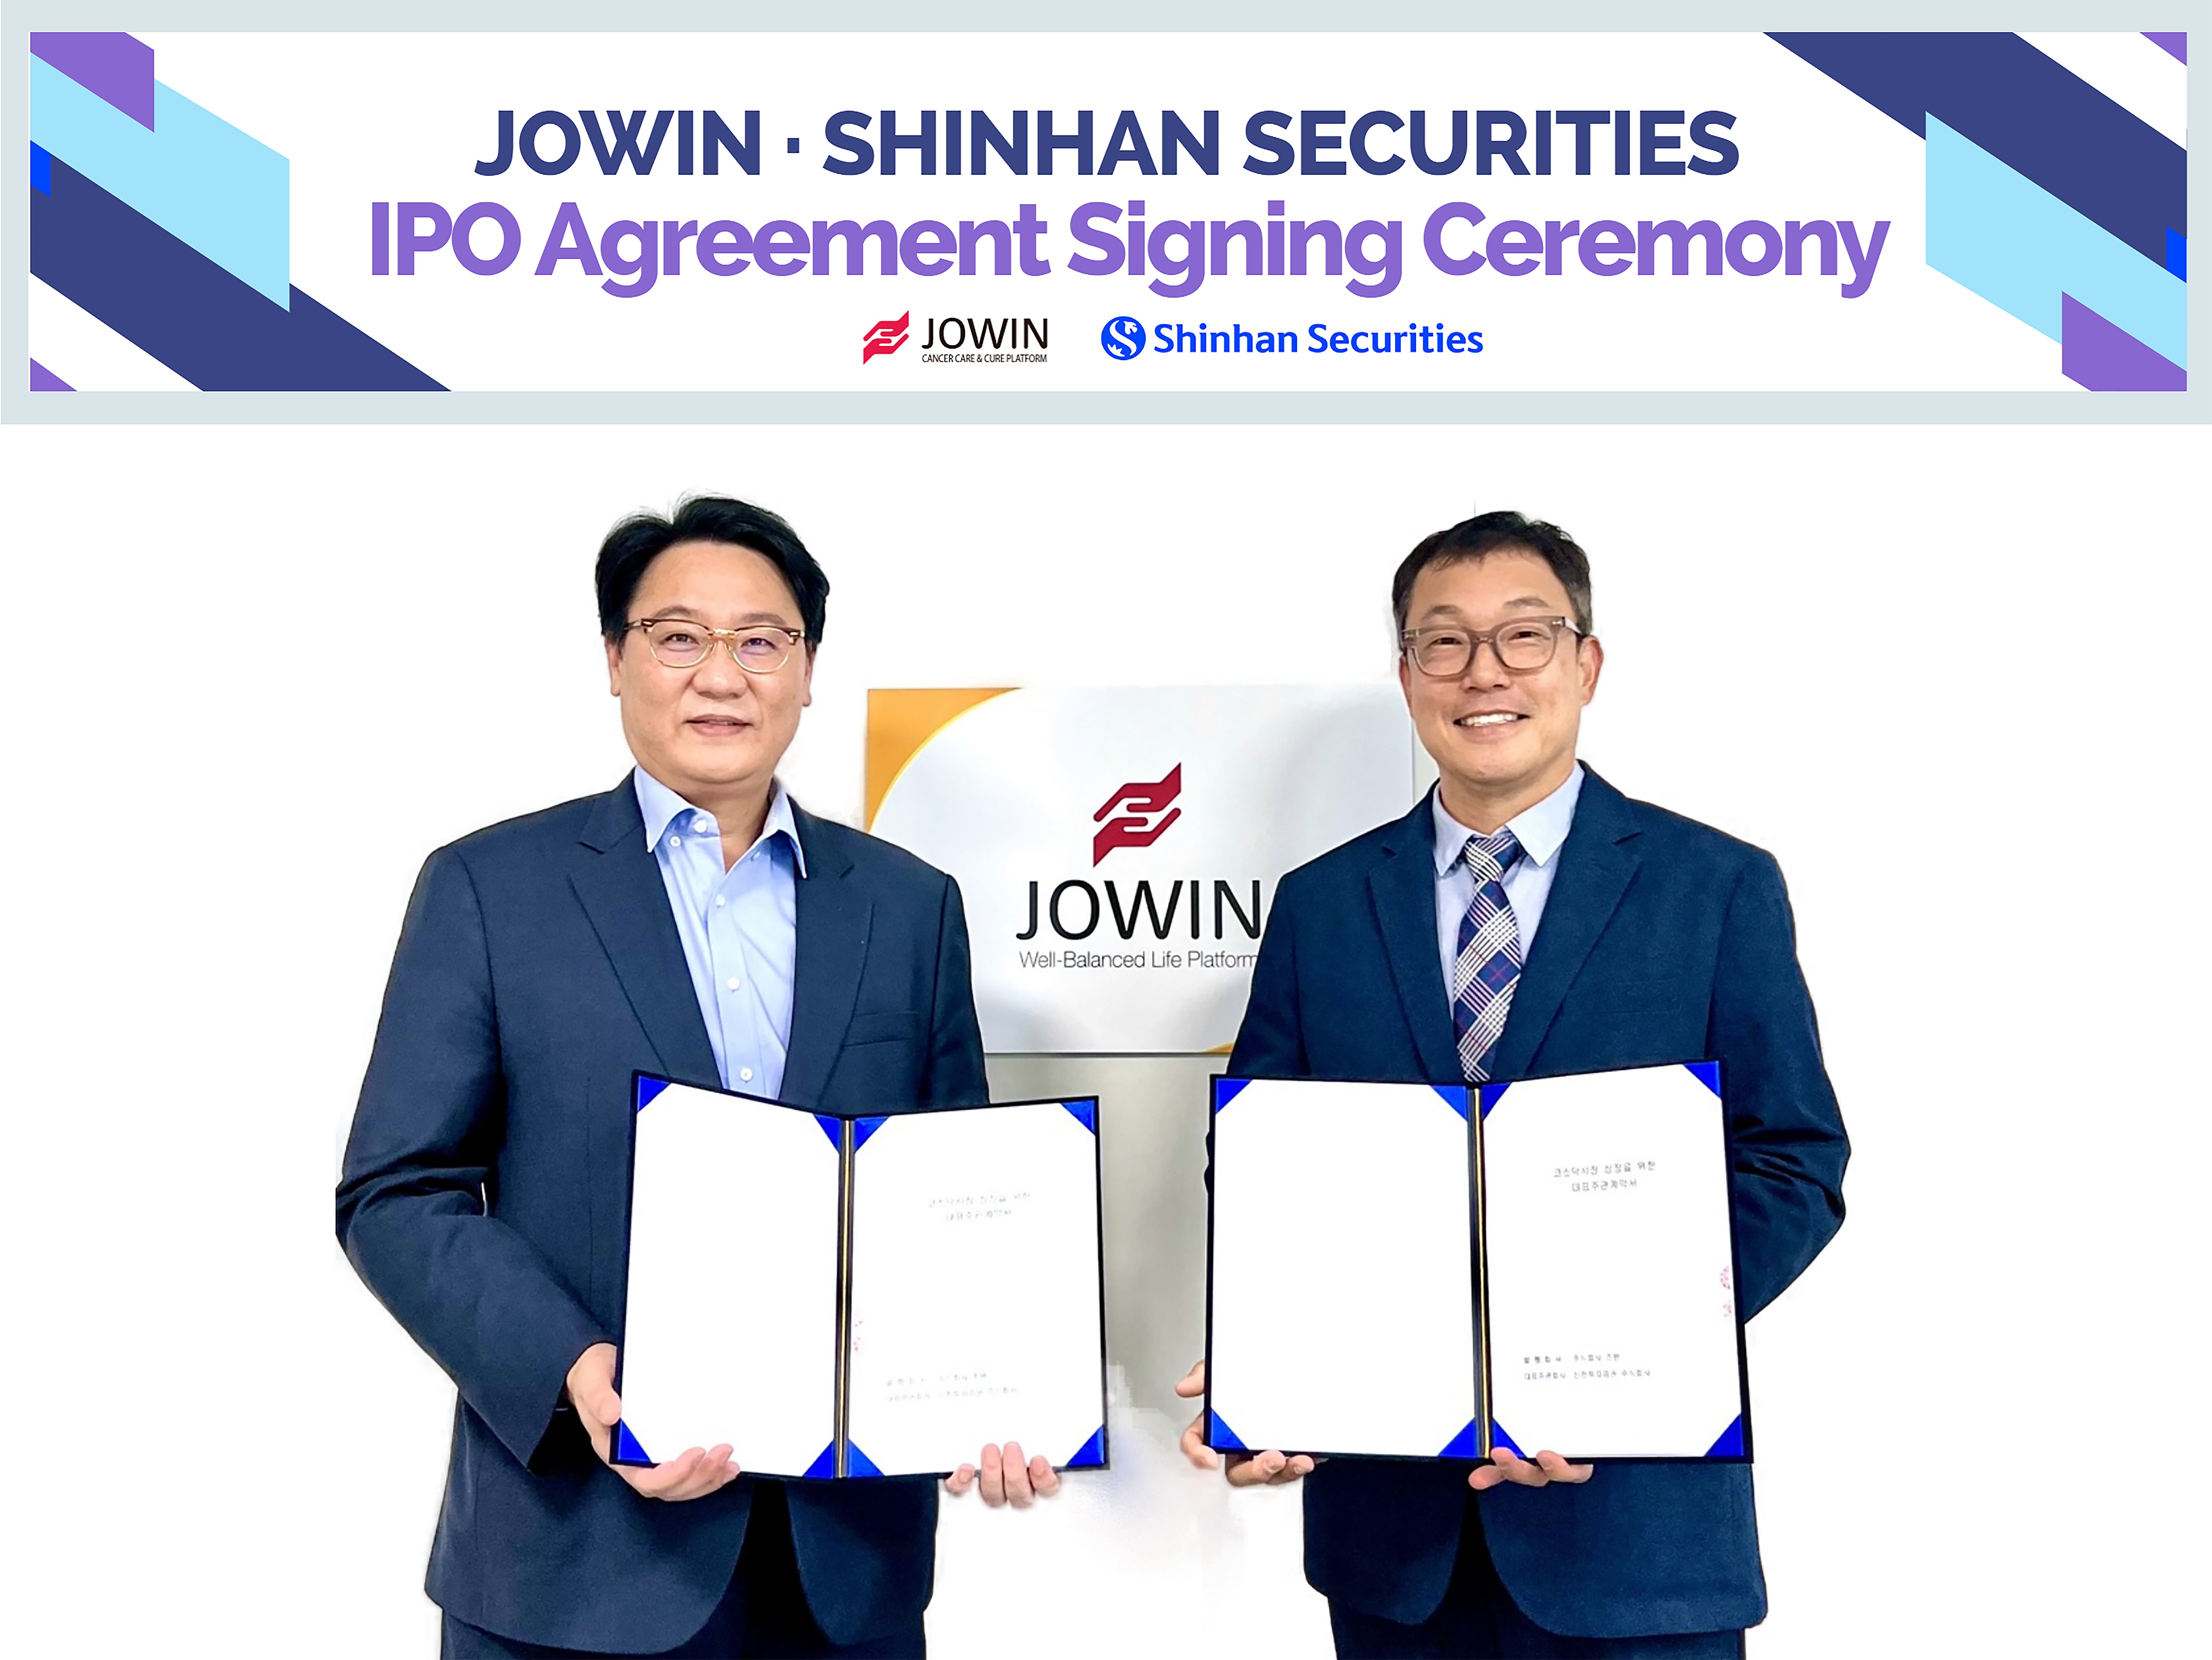 Jowin and Shinhan Securities IPO Agreement Signing Ceremony